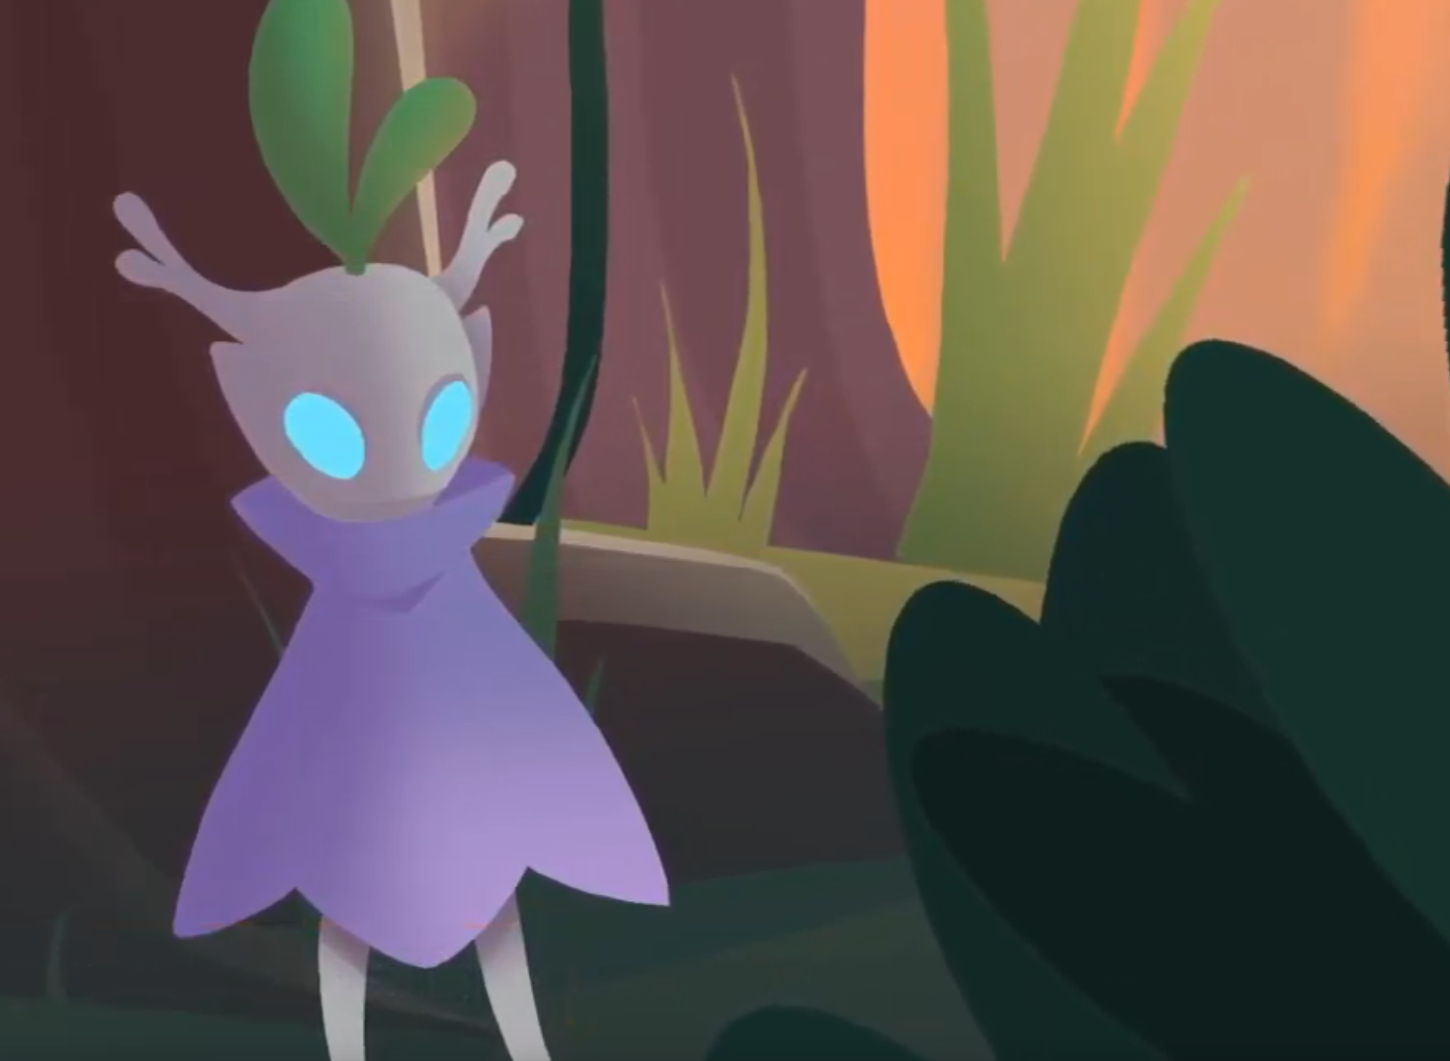 Screenshot from Darkwood depicing the main character in a forest clearing